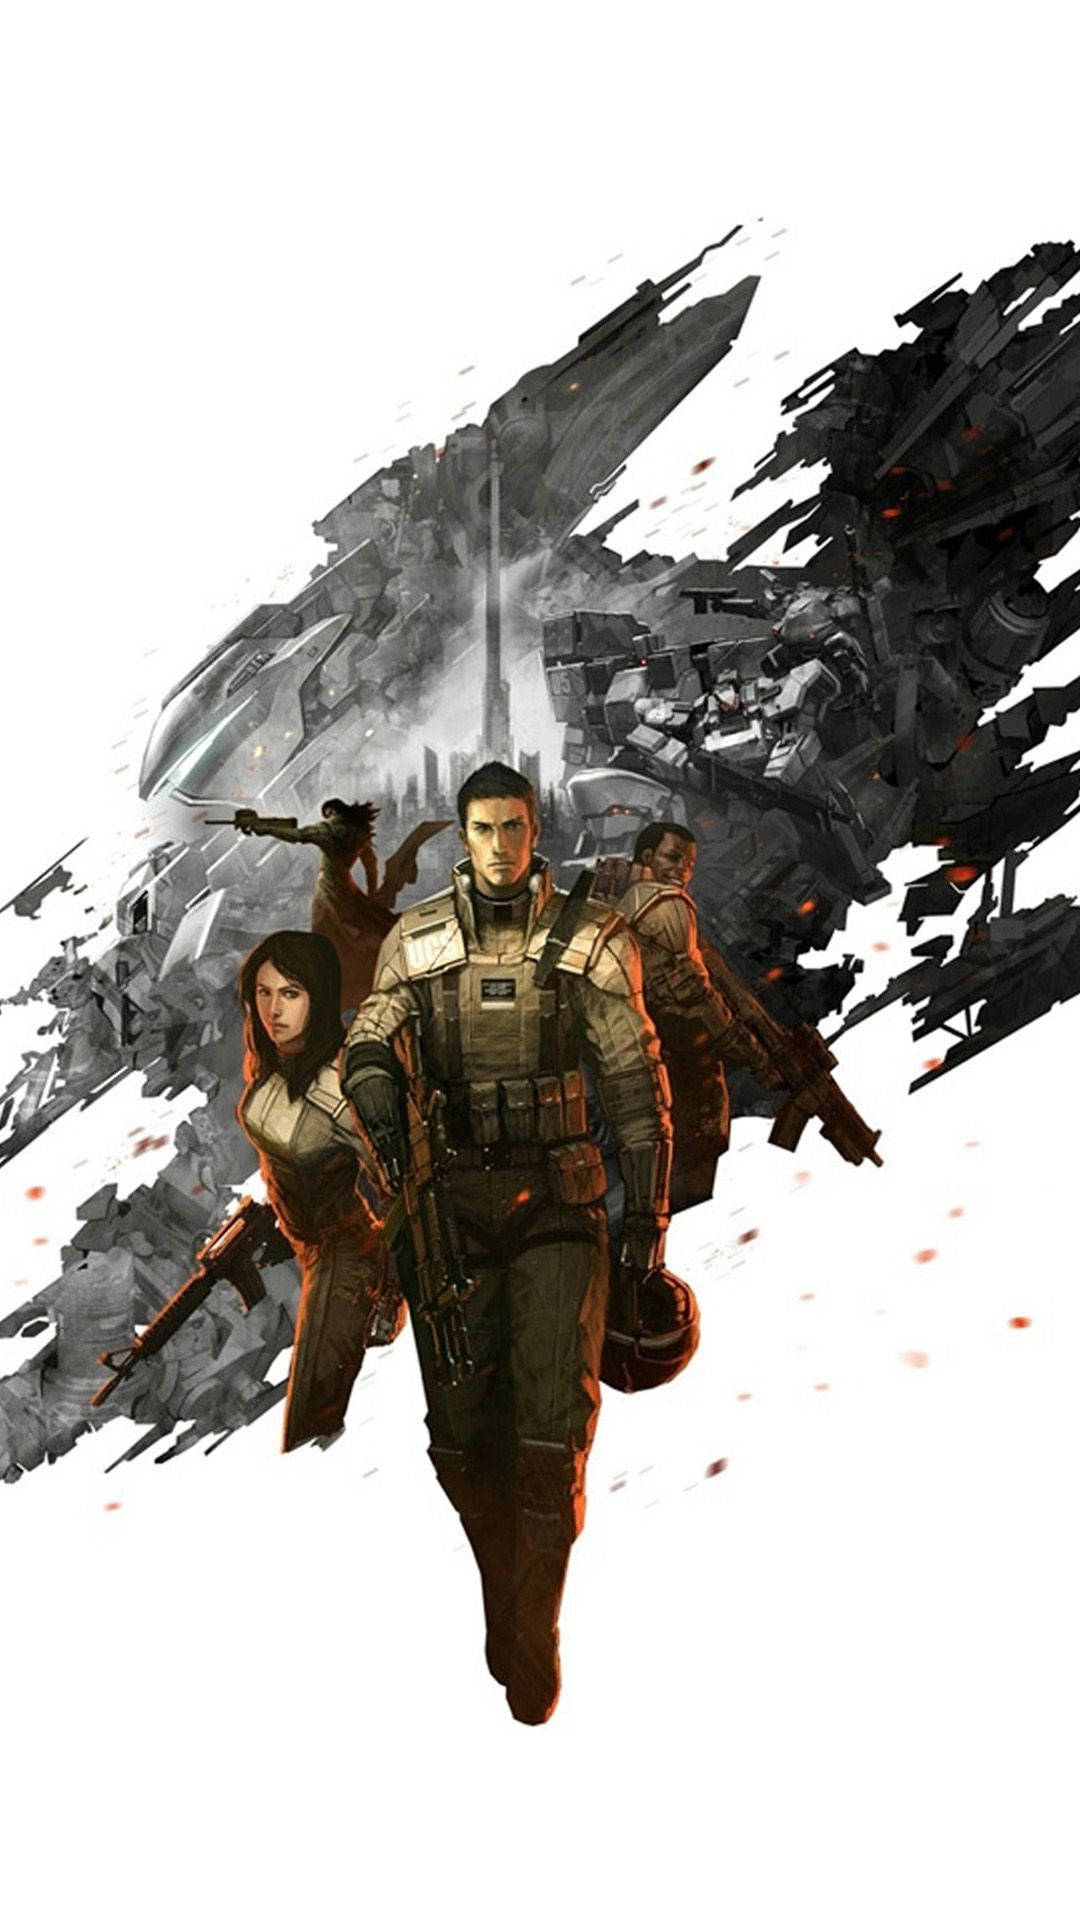 Engaging Action in Front Mission Evolved Android Gaming Wallpaper